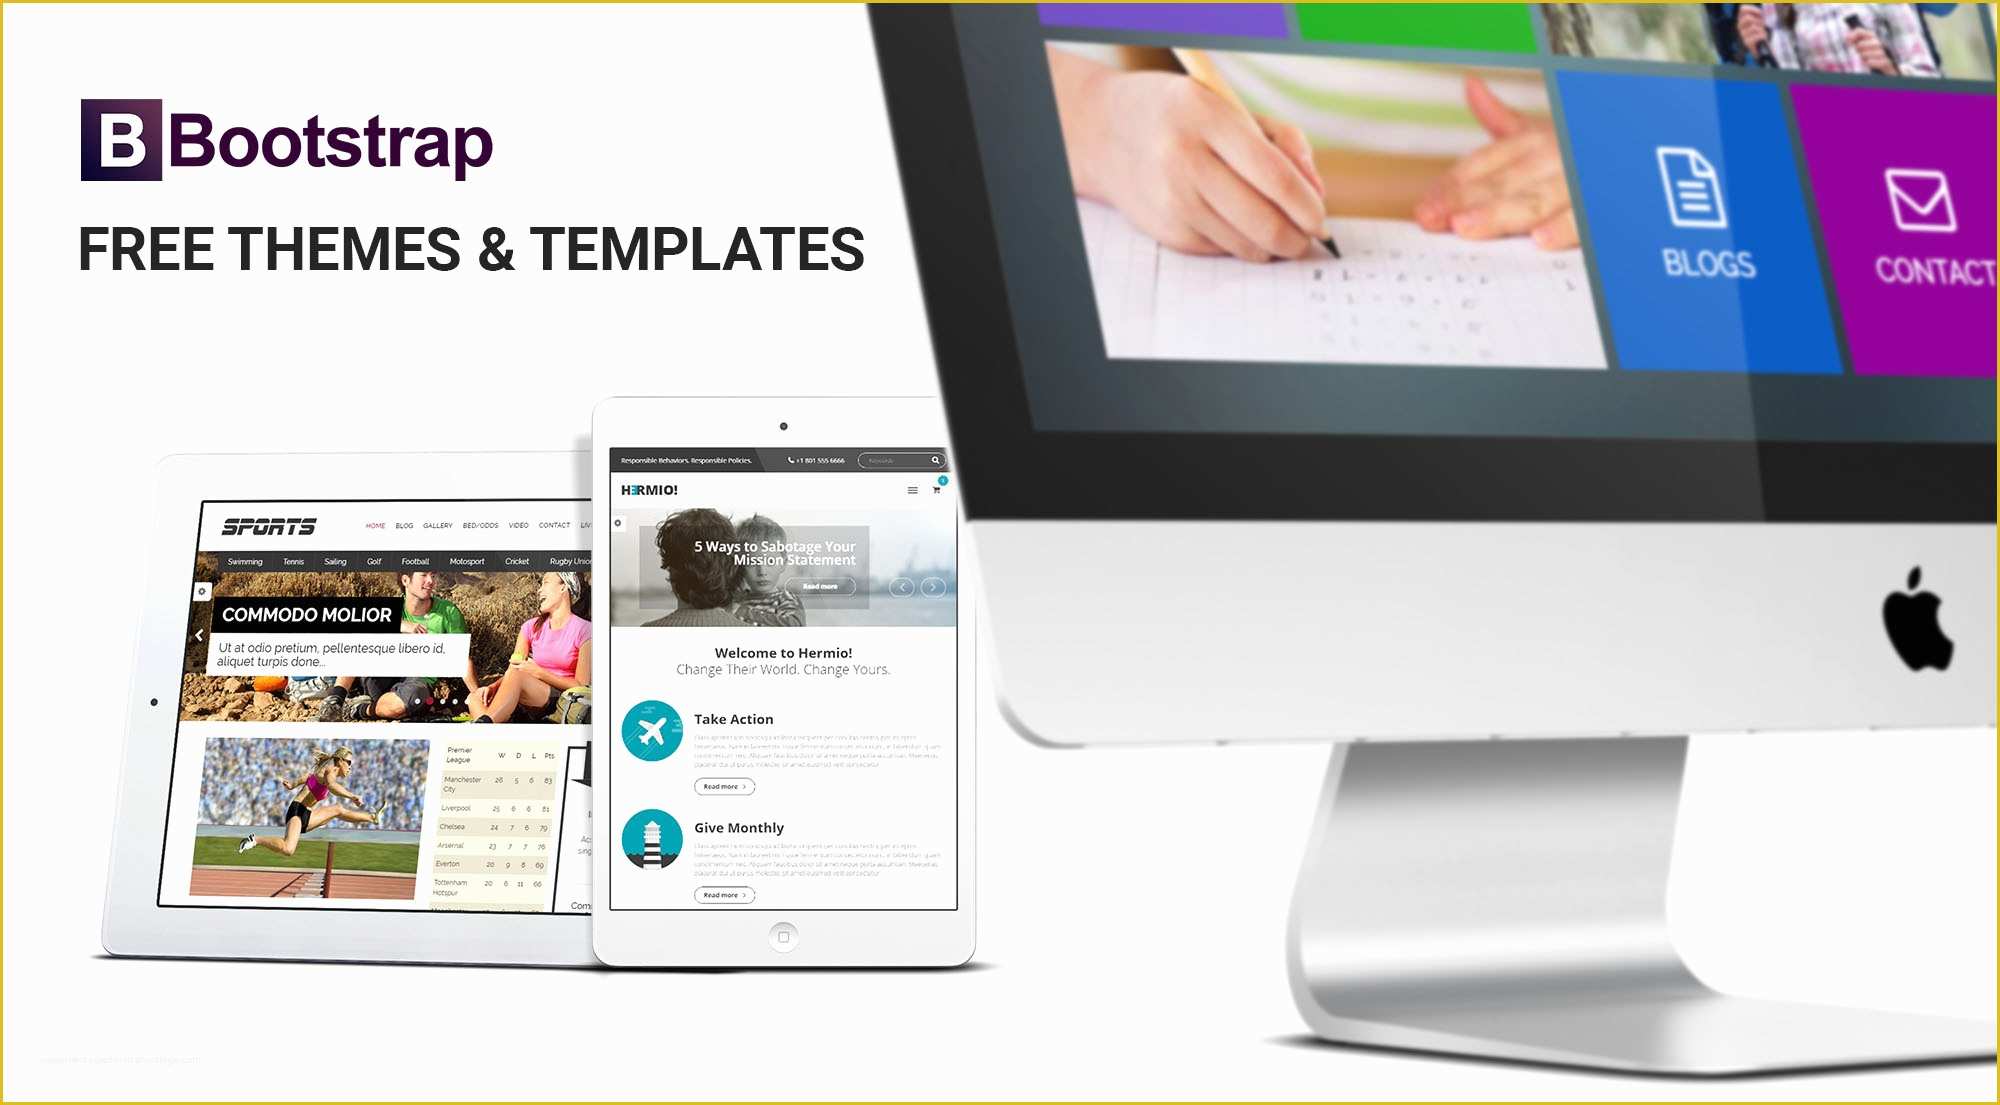 Free Bootstrap Templates 2017 Of Css Templates – Revolutionary Internet tools – the Know It Guy